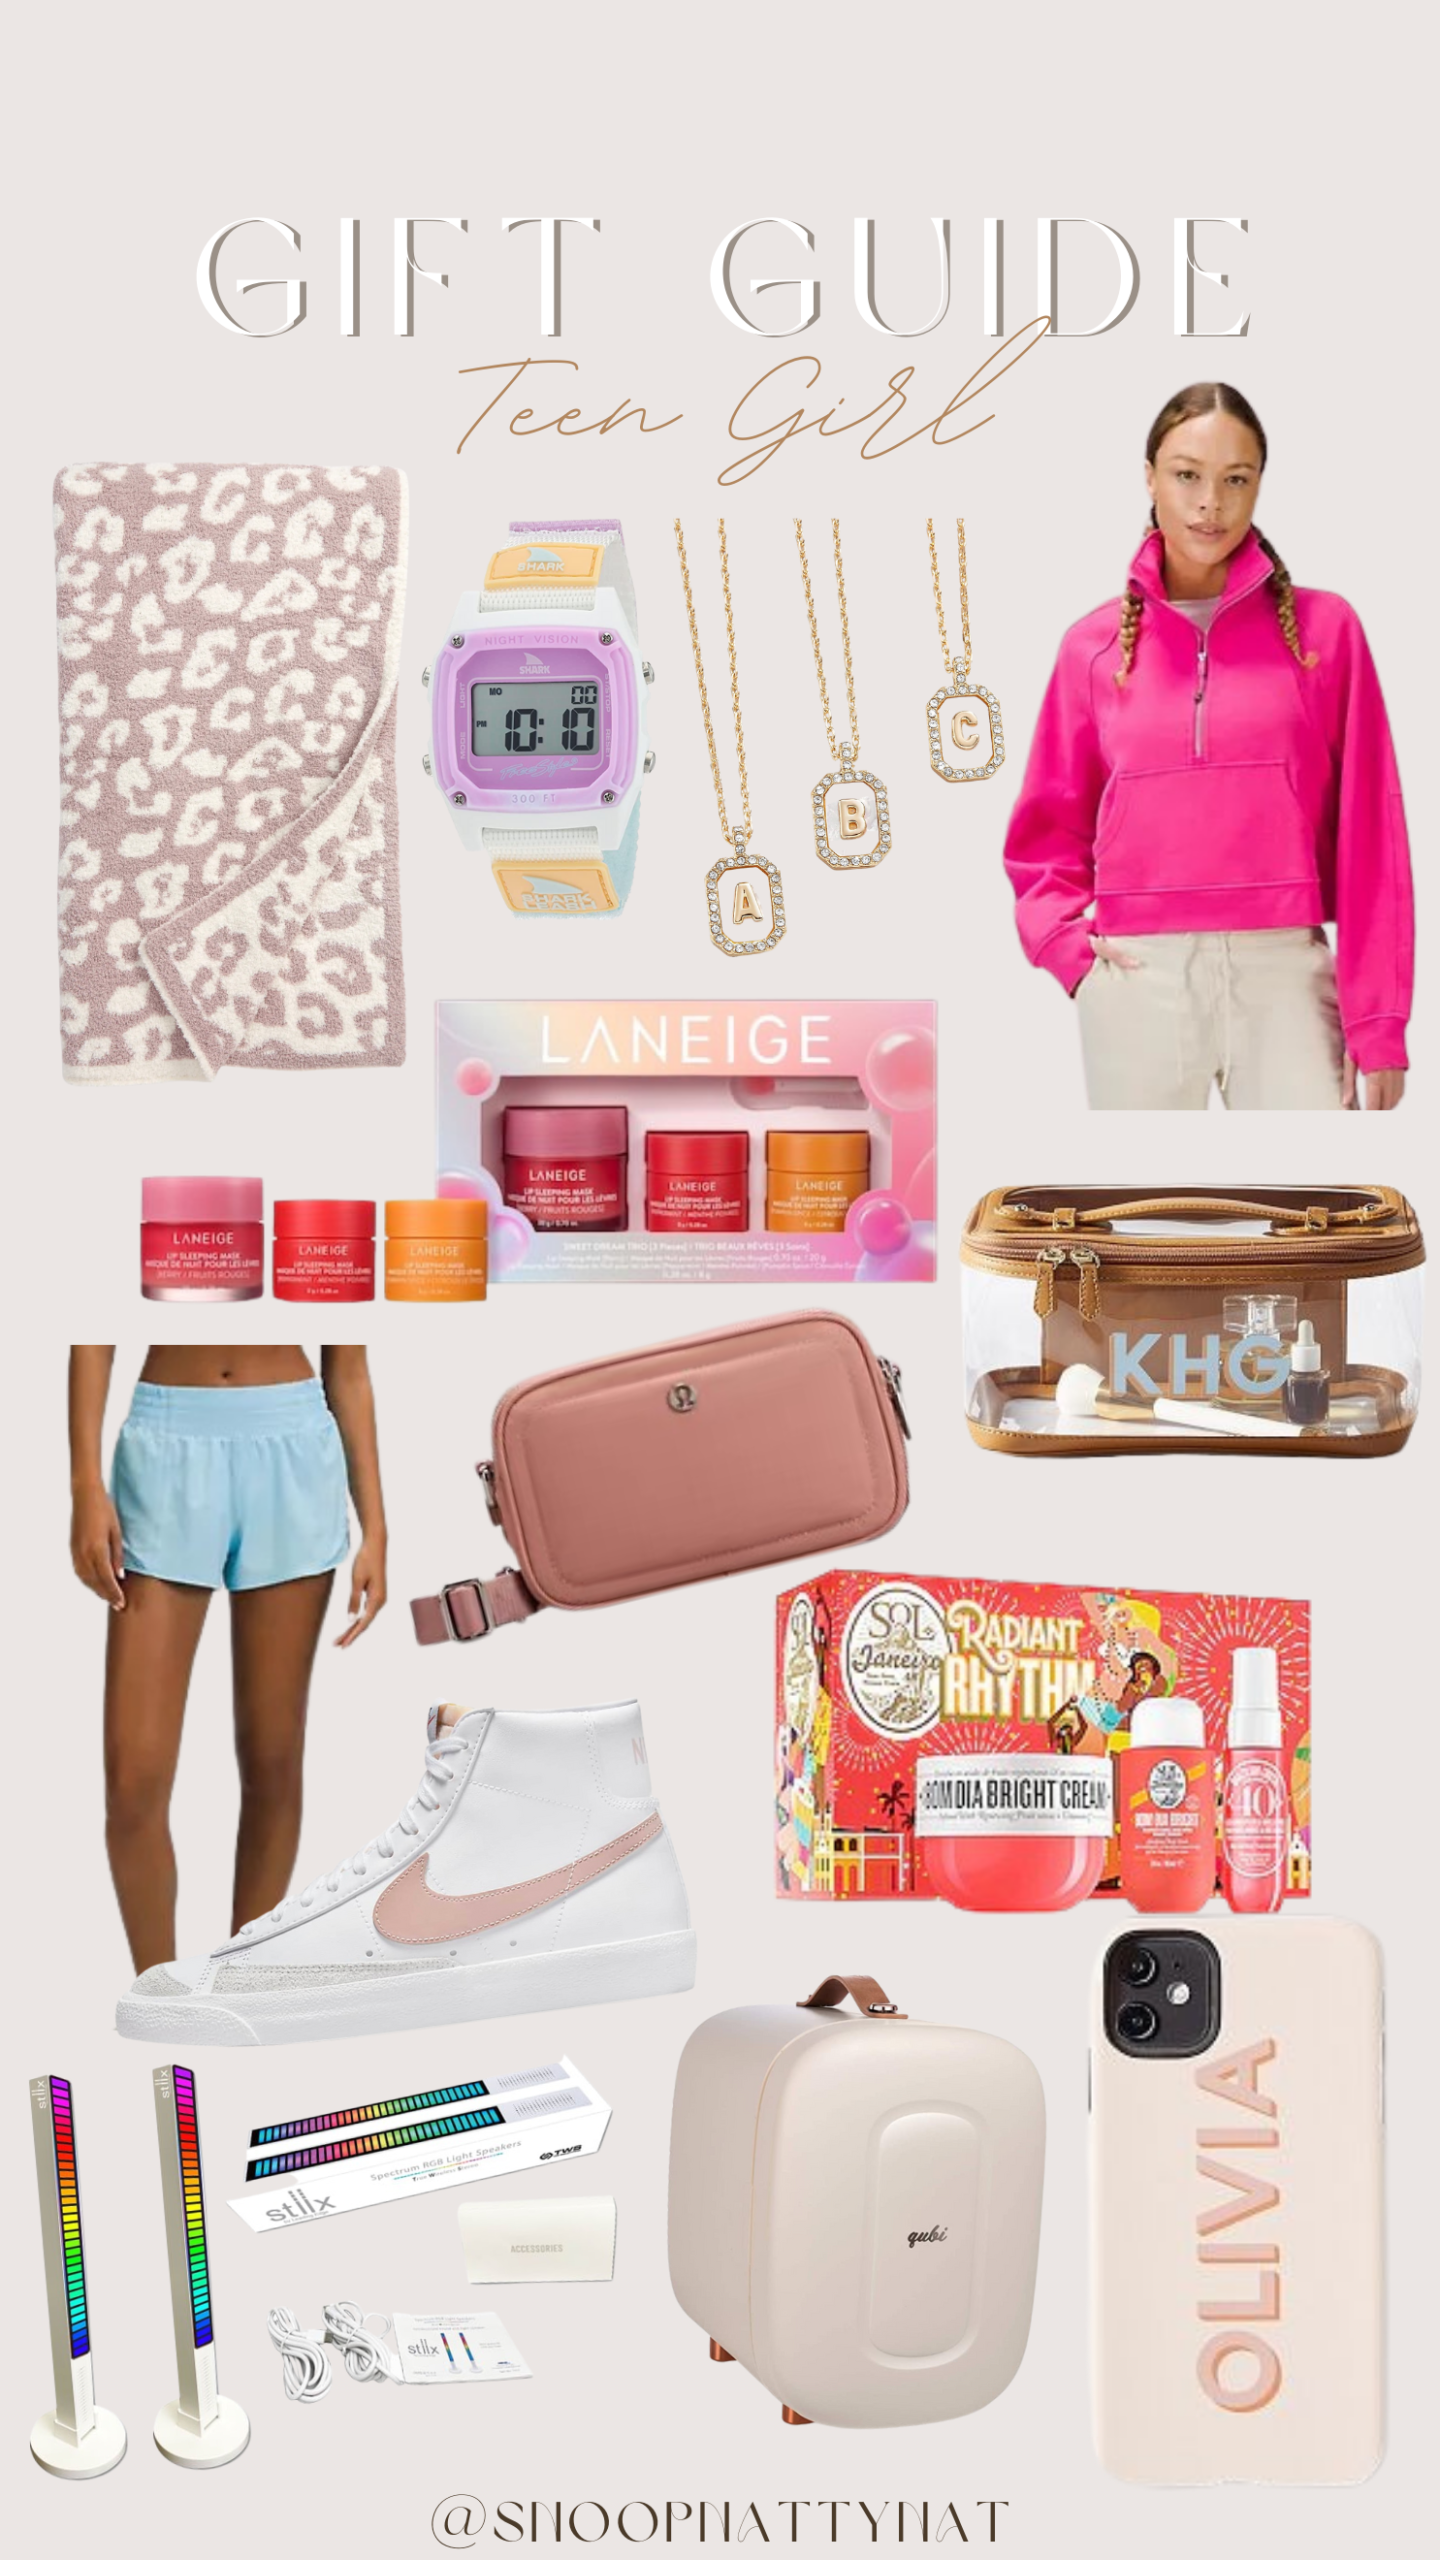 Gift Guide for Teen Girls – Just Posted